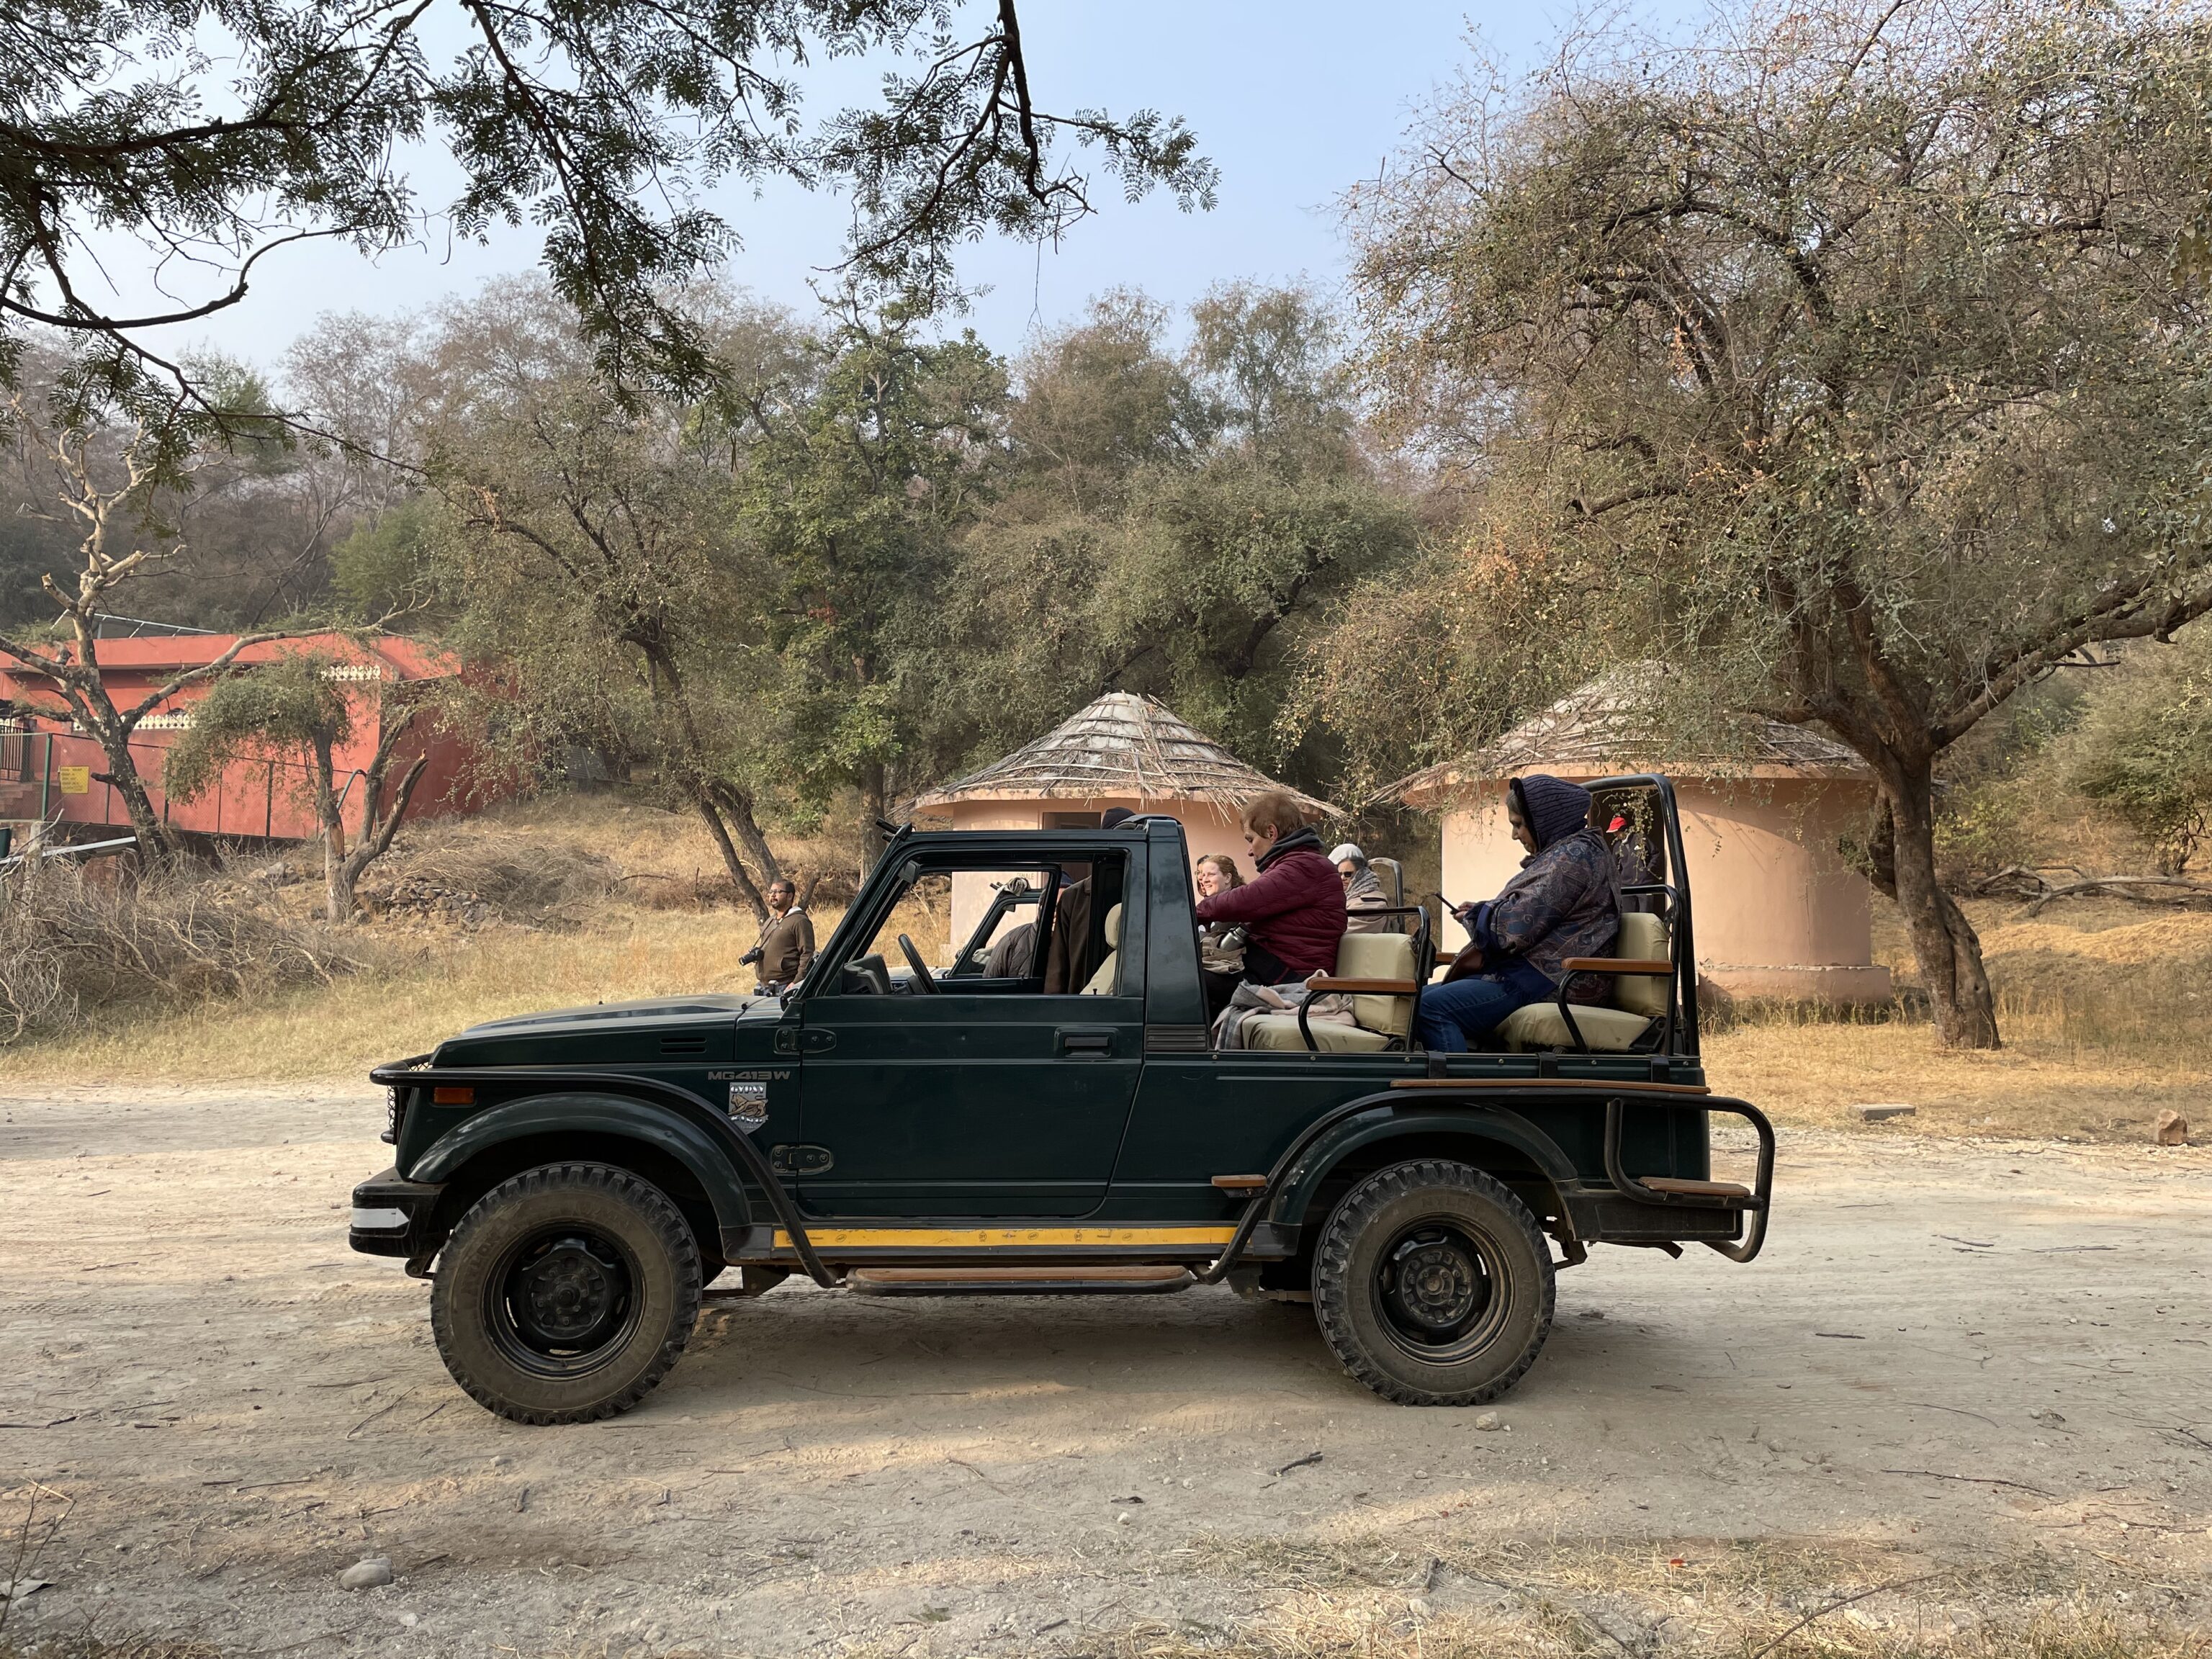 Ranthambore National Park in Noord-India